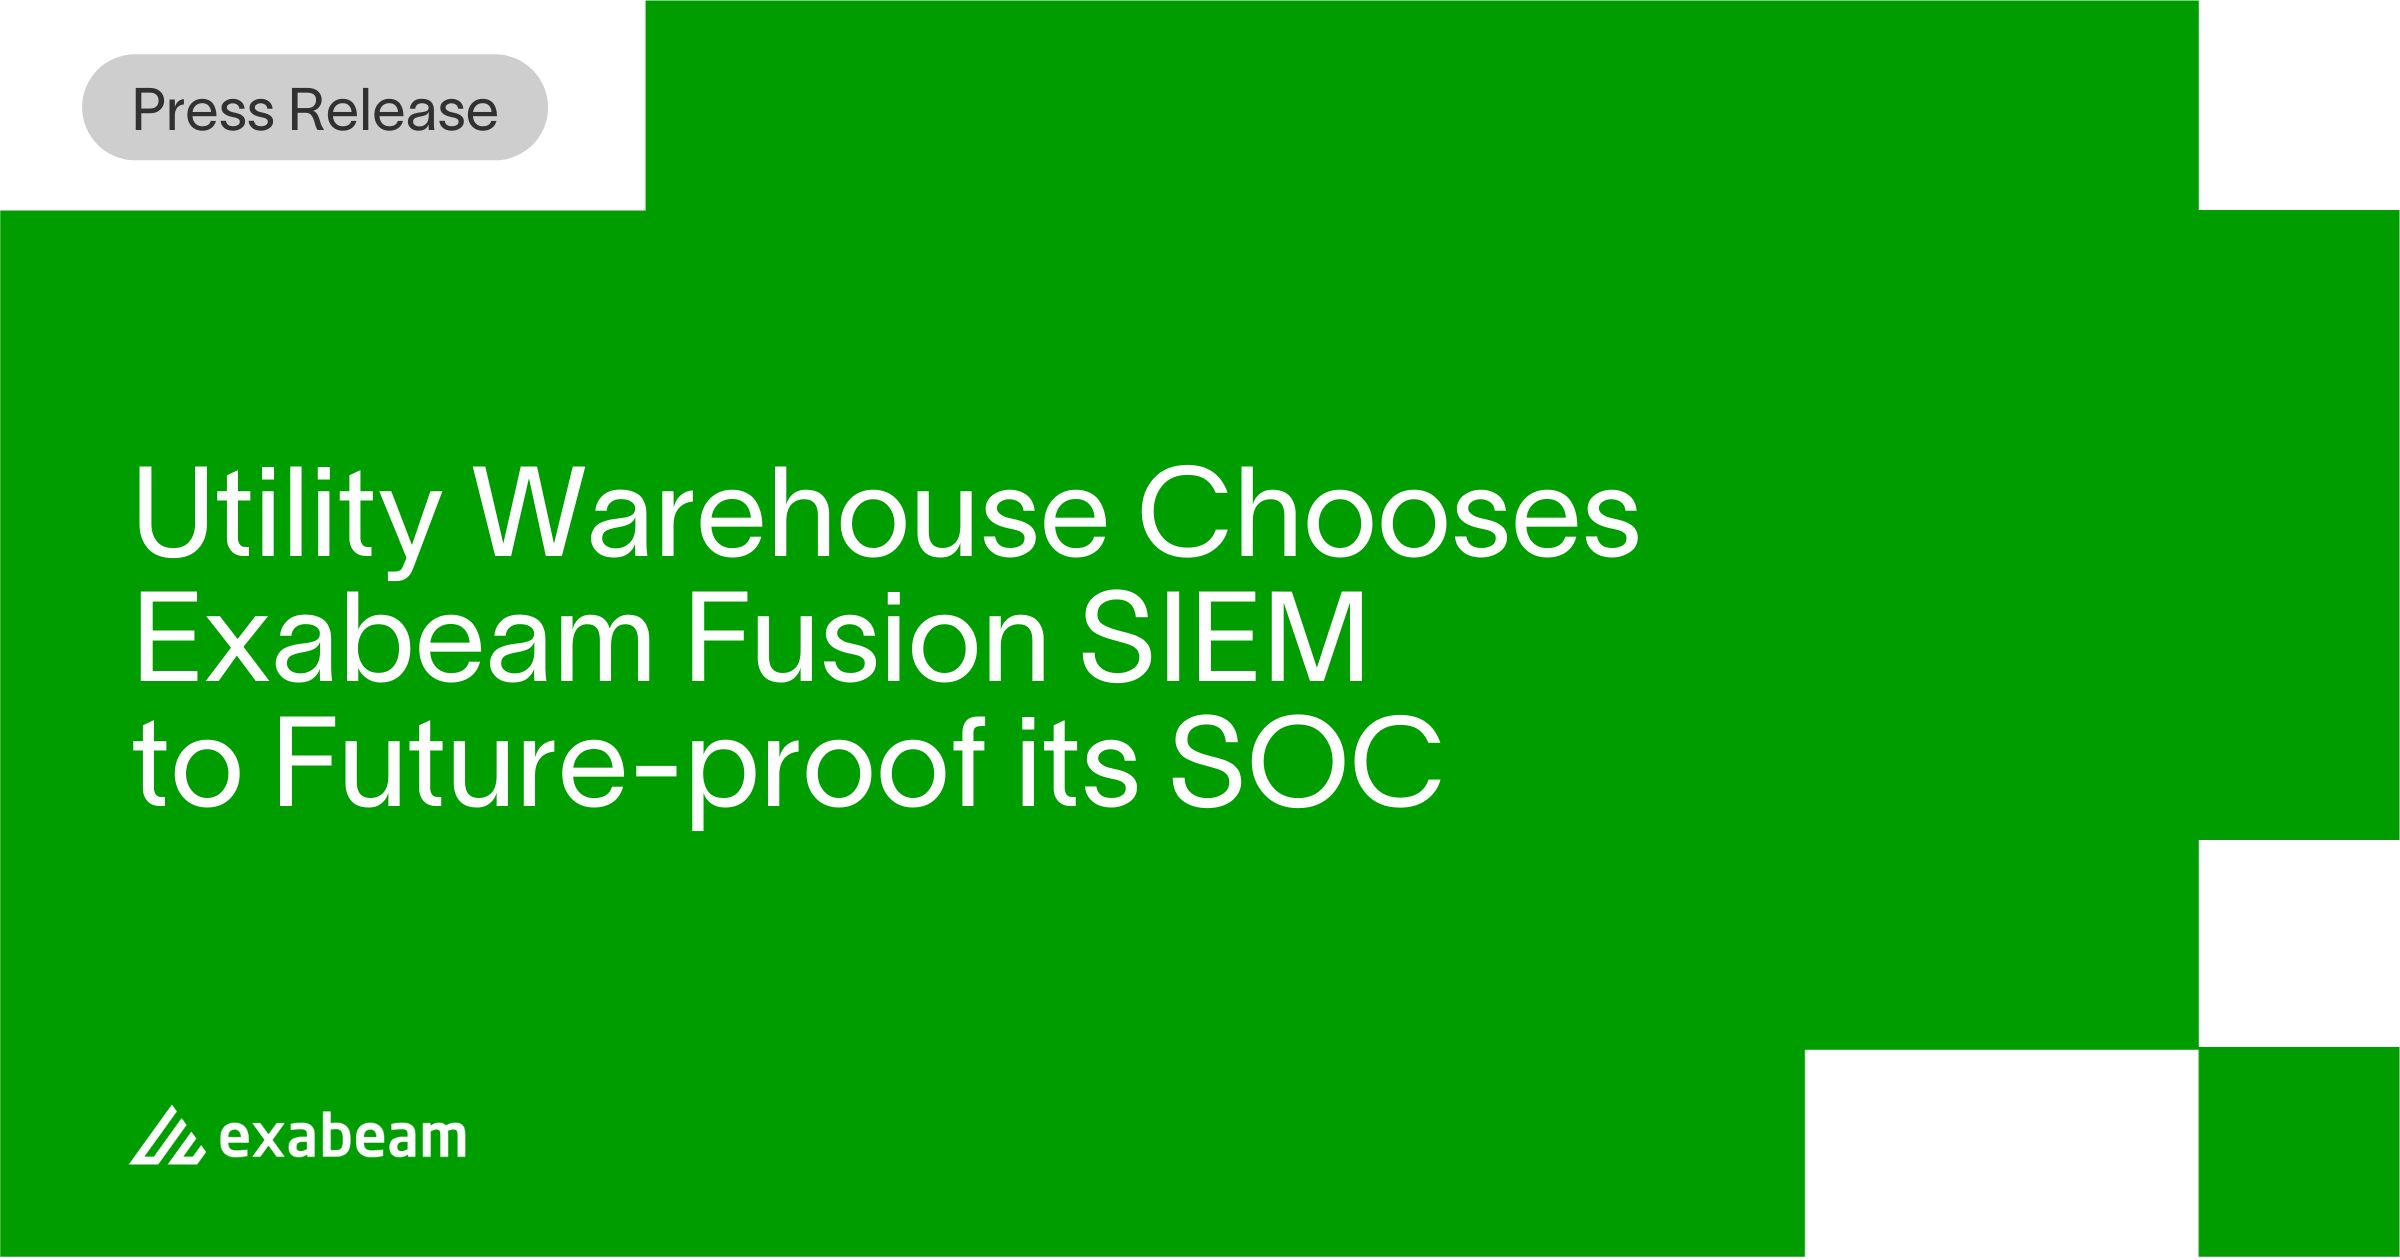 Utility Warehouse Chooses Exabeam Fusion SIEM to Future-proof its SOC